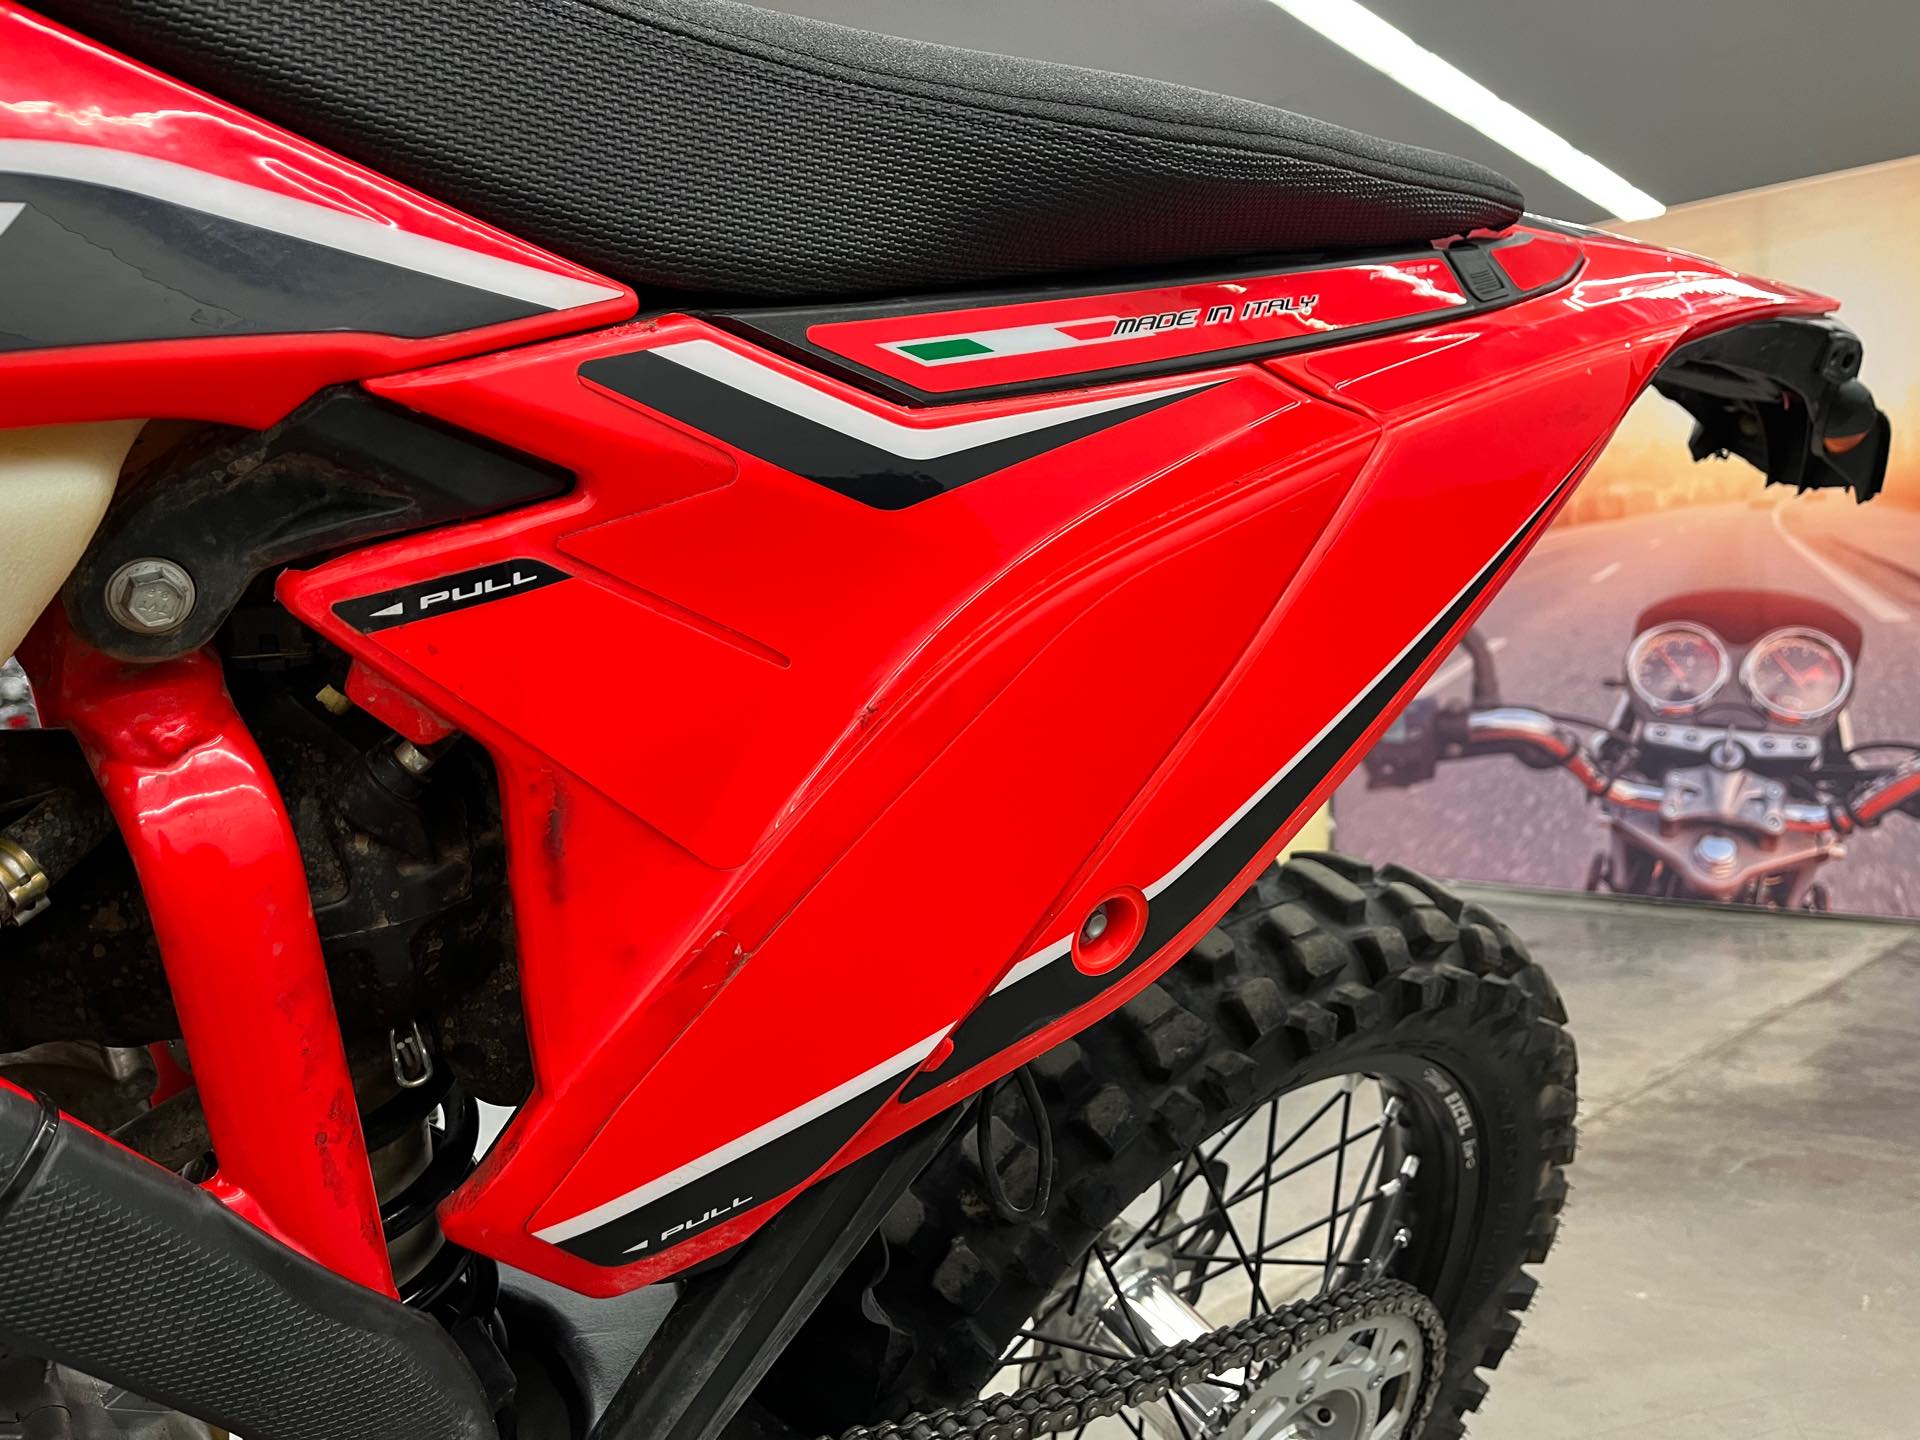 2022 BETA RR-S 350 at Aces Motorcycles - Denver